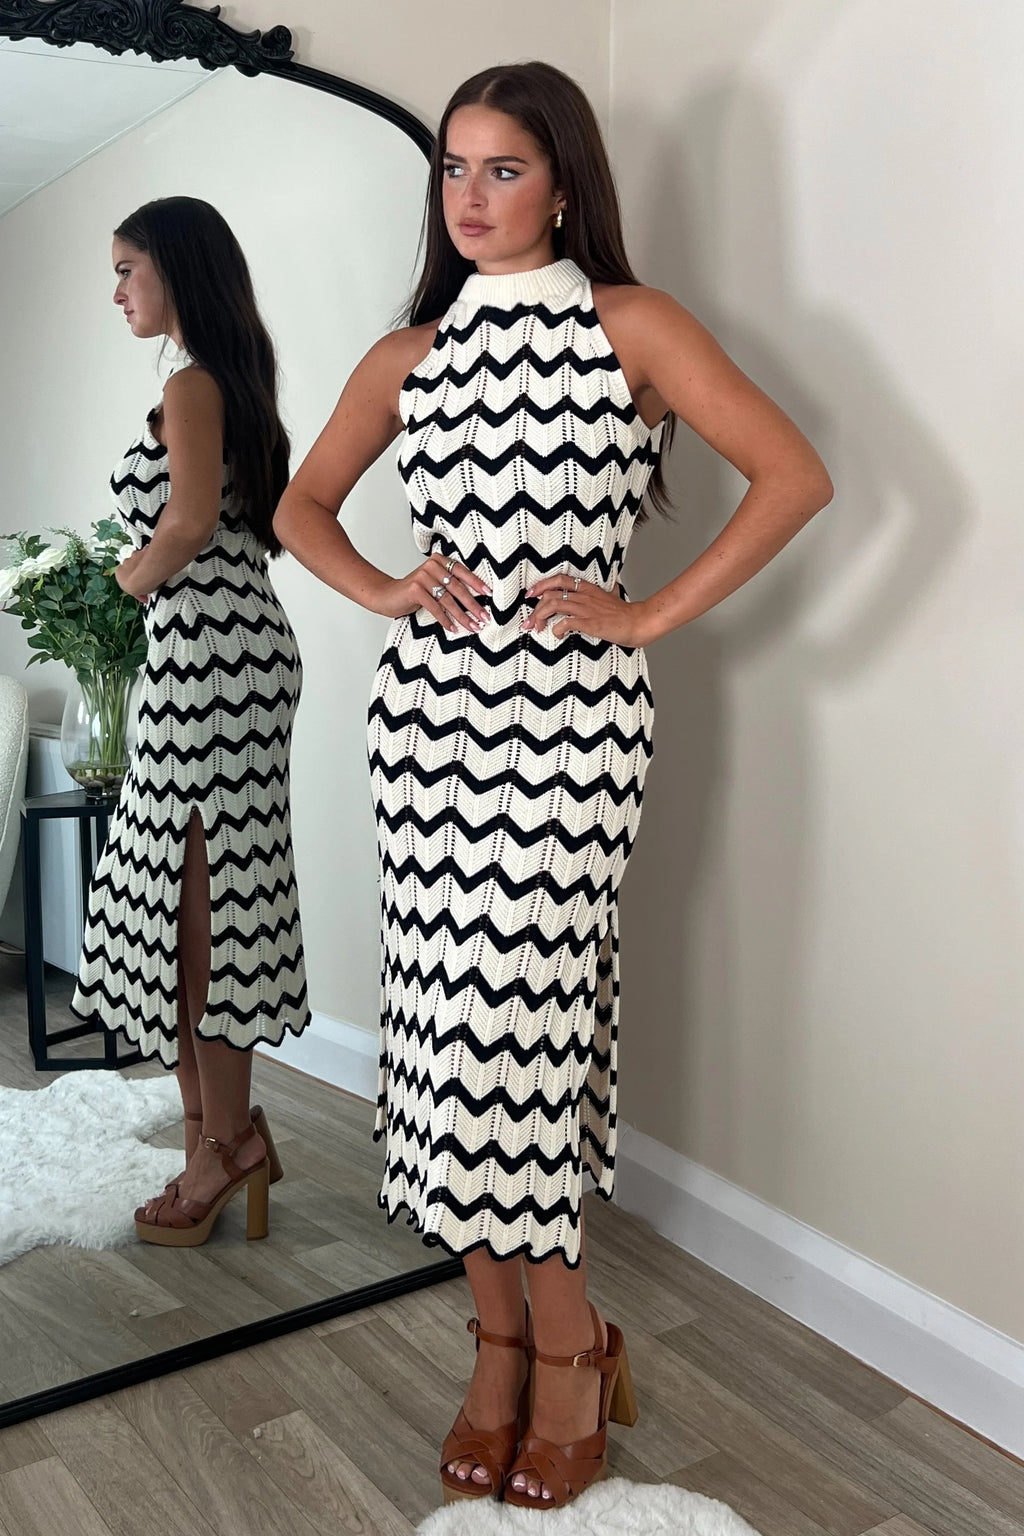 This stunning dress features a chic and intricate crochet design, creating a timeless and elegant look. Perfect for any occasion, this dress will make you feel confident and stylish. Elevate your wardrobe with this must-have piece!